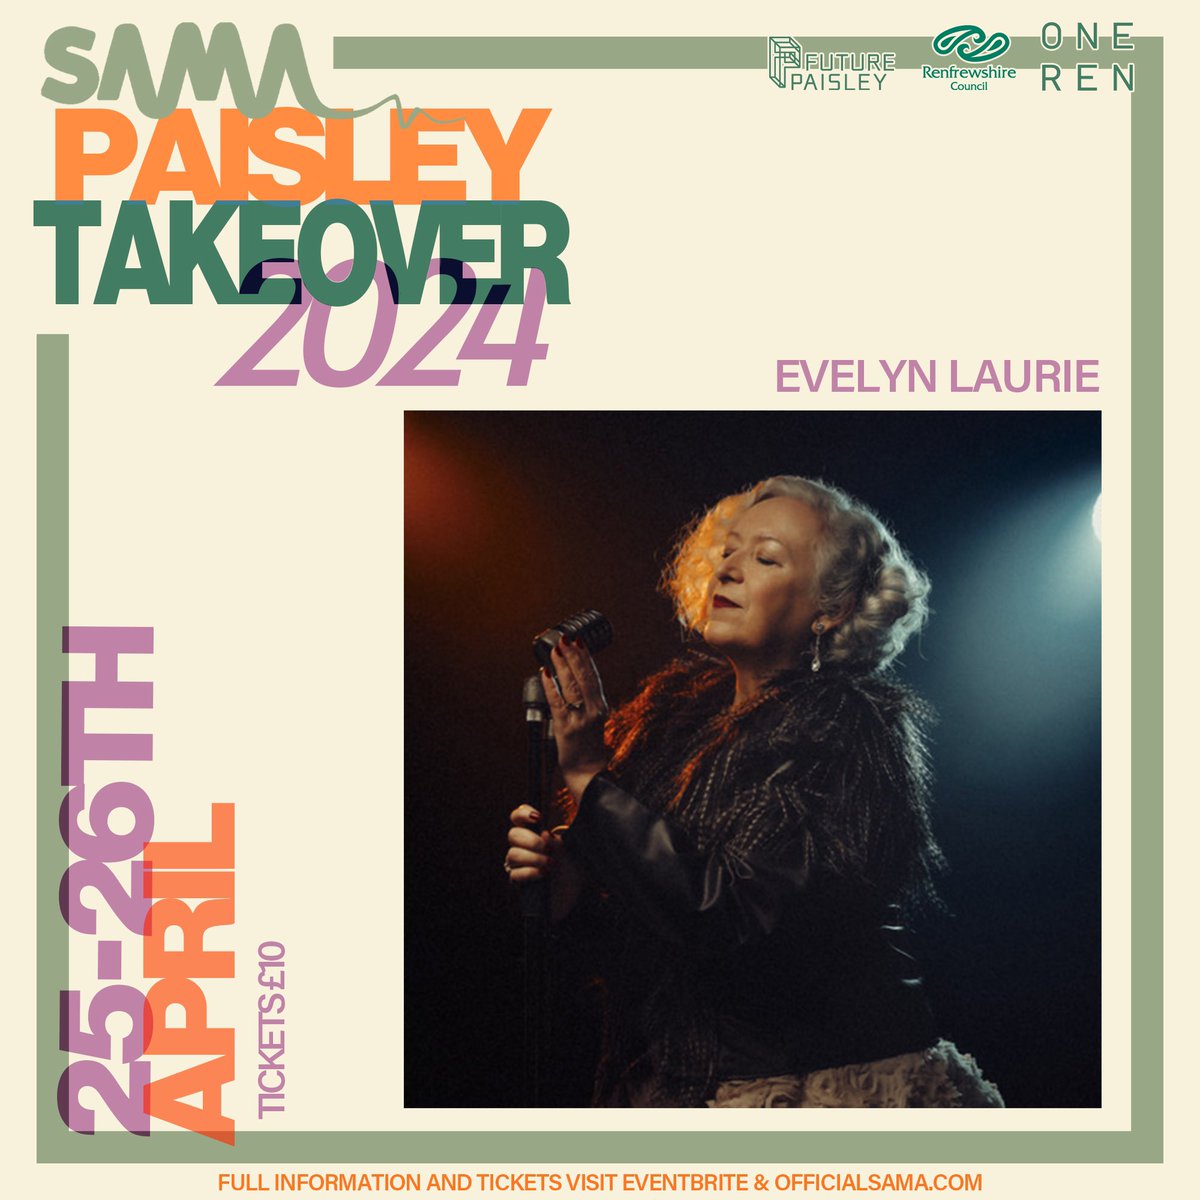 SAMA Paisley Takeover Artist Spotlight: Evelyn Laurie Known for her transcendent vocals and contemporary jazz stylings, Evelyn, who hails from Paisley, Scotland, has been delighting audiences with her distinctive approach to well- known standards…. 1/4